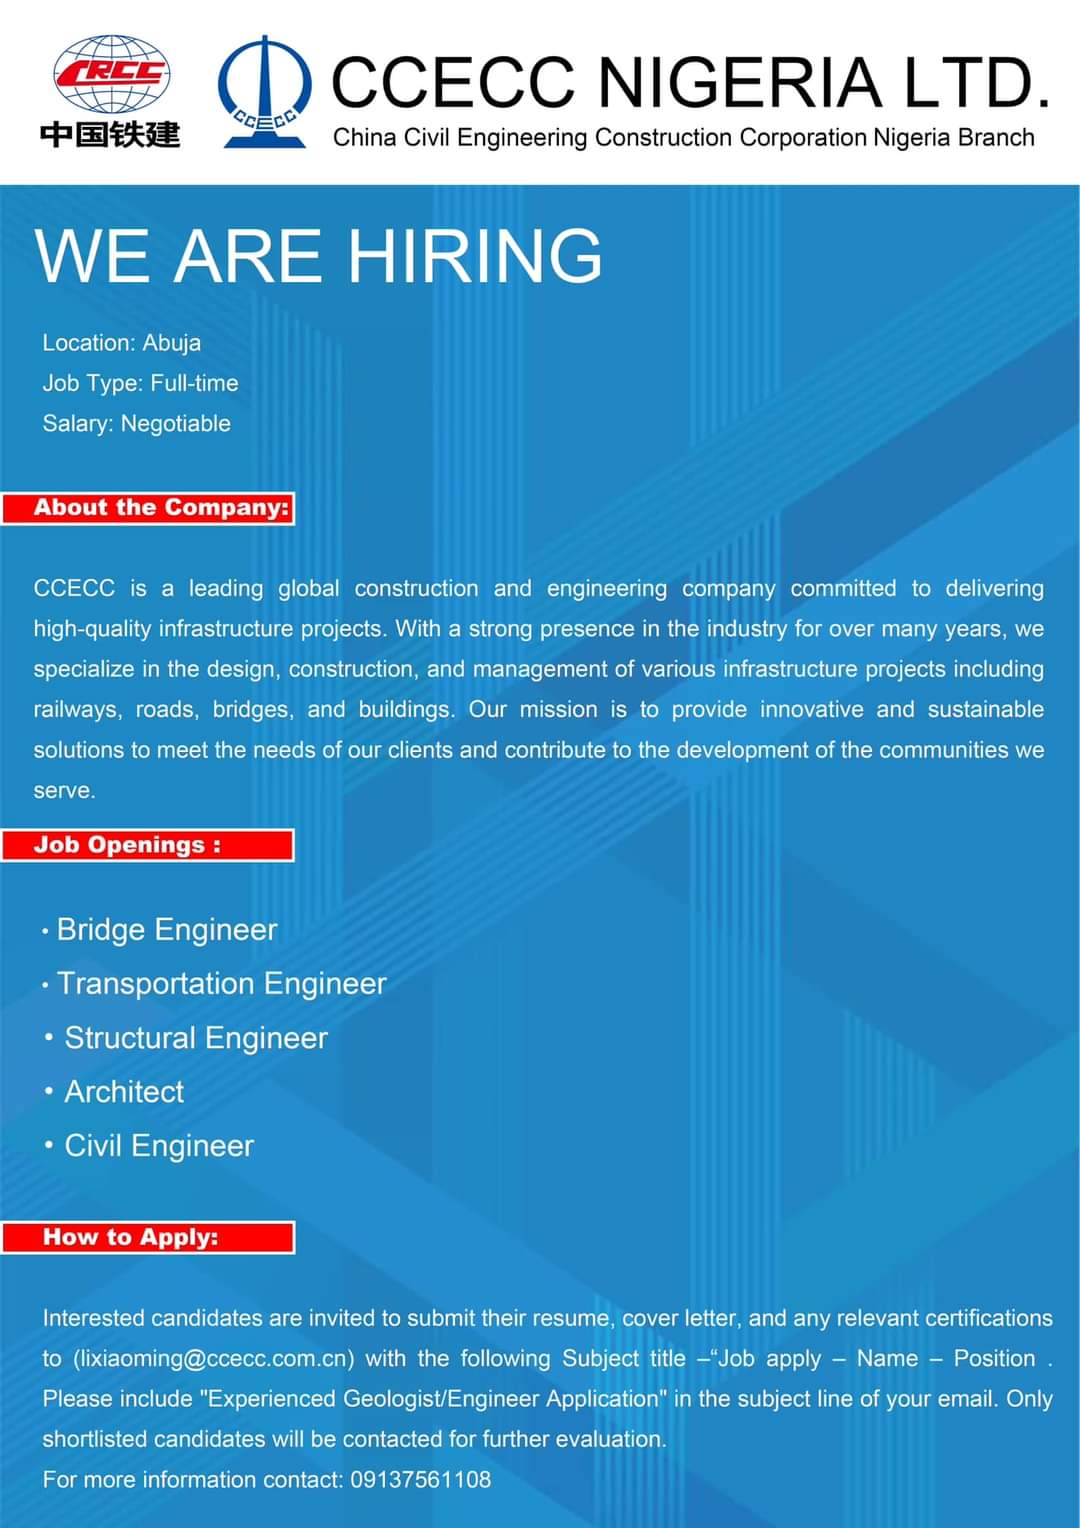 Apply Now: China Civil Engineering Construction Corporation Nigeria (CCECC) is currently recruiting